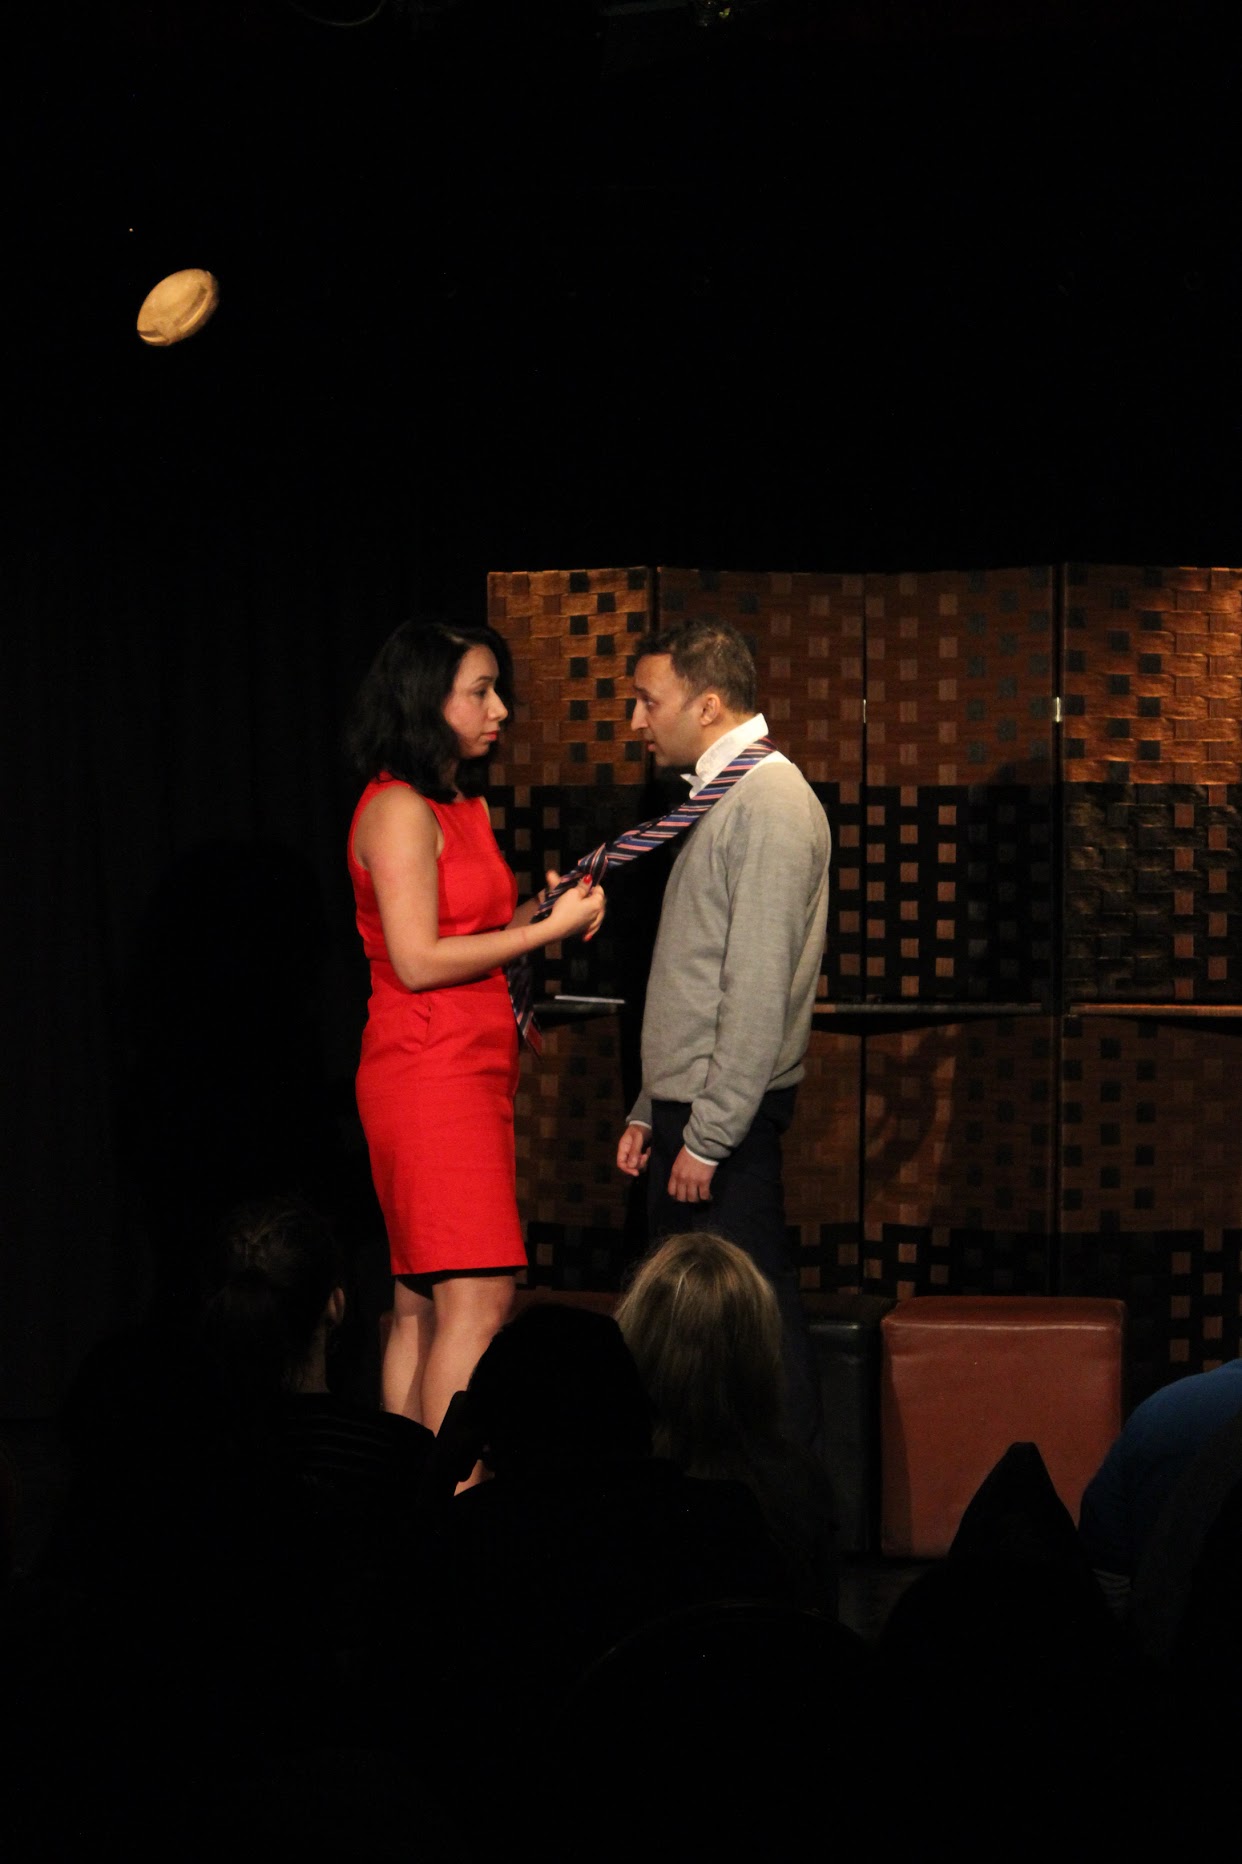 The Monologue @ The Playwright Café, London. Feb 2015.